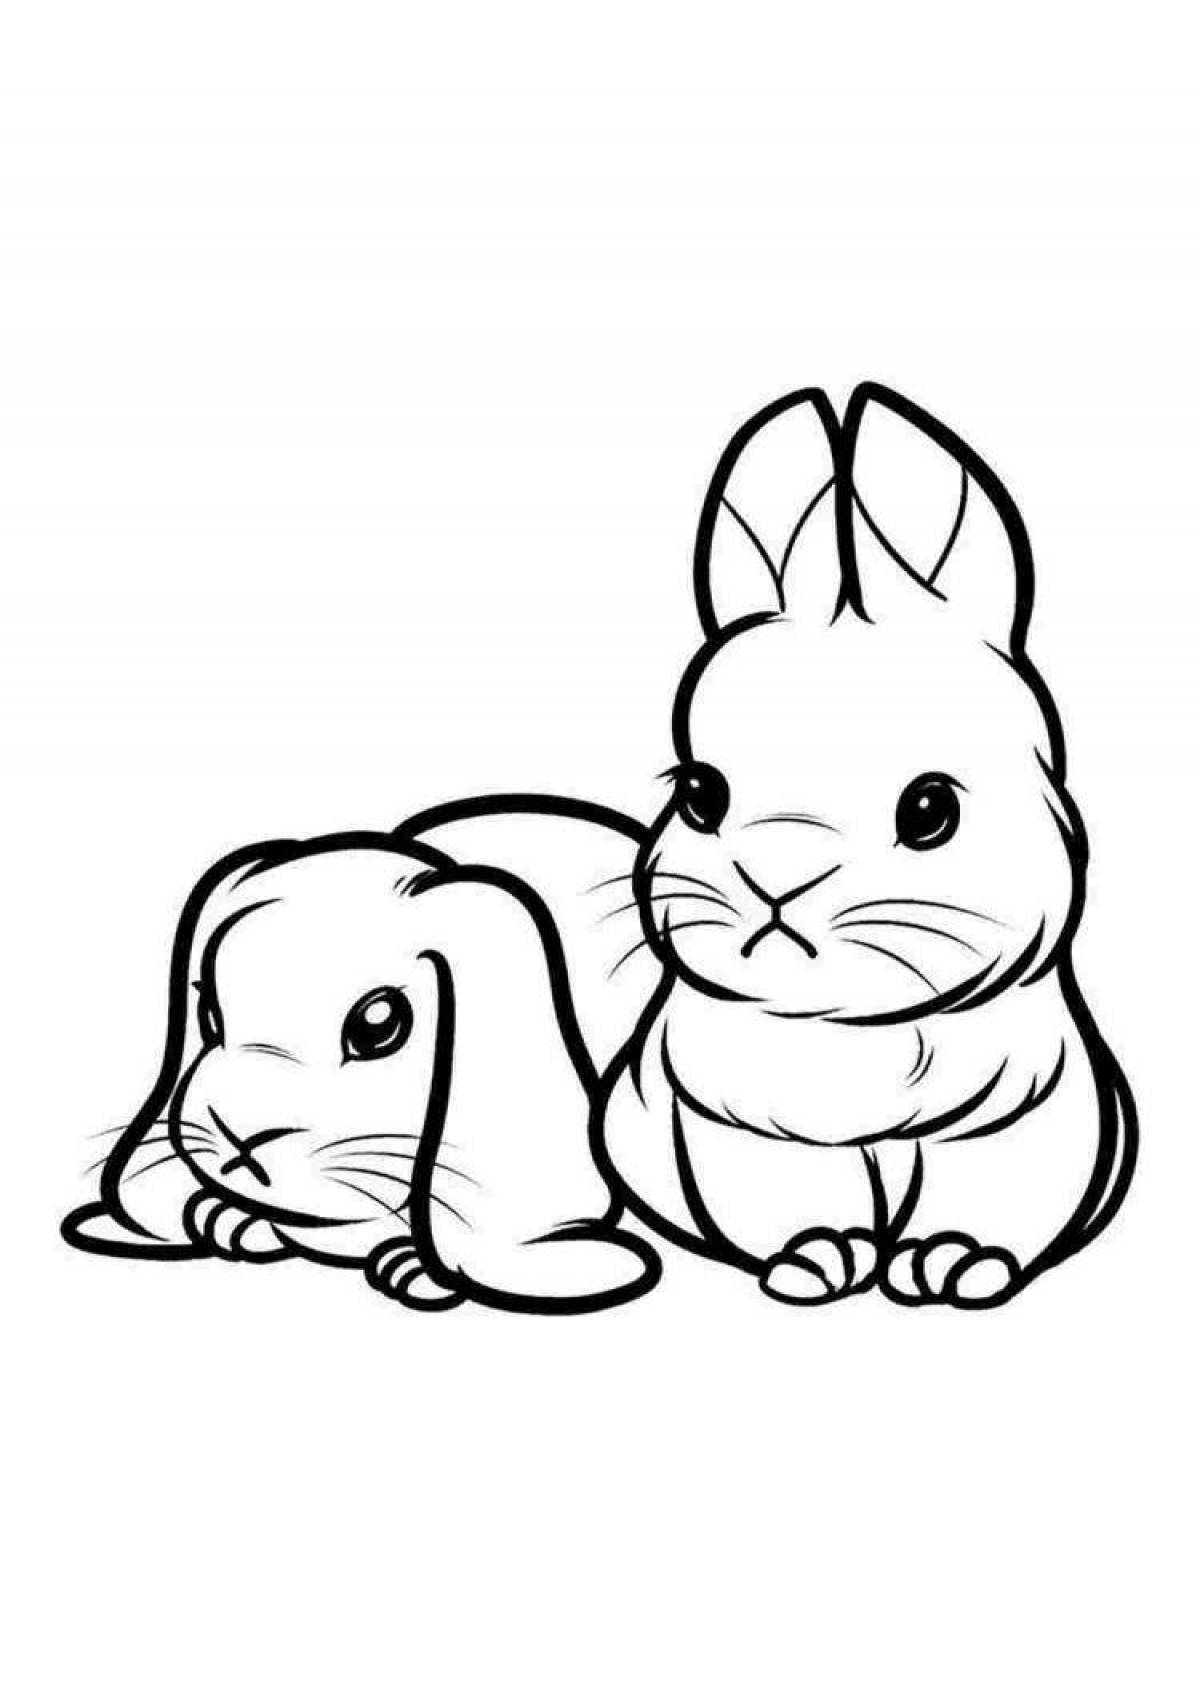 Coloring book glowing rabbit and cat